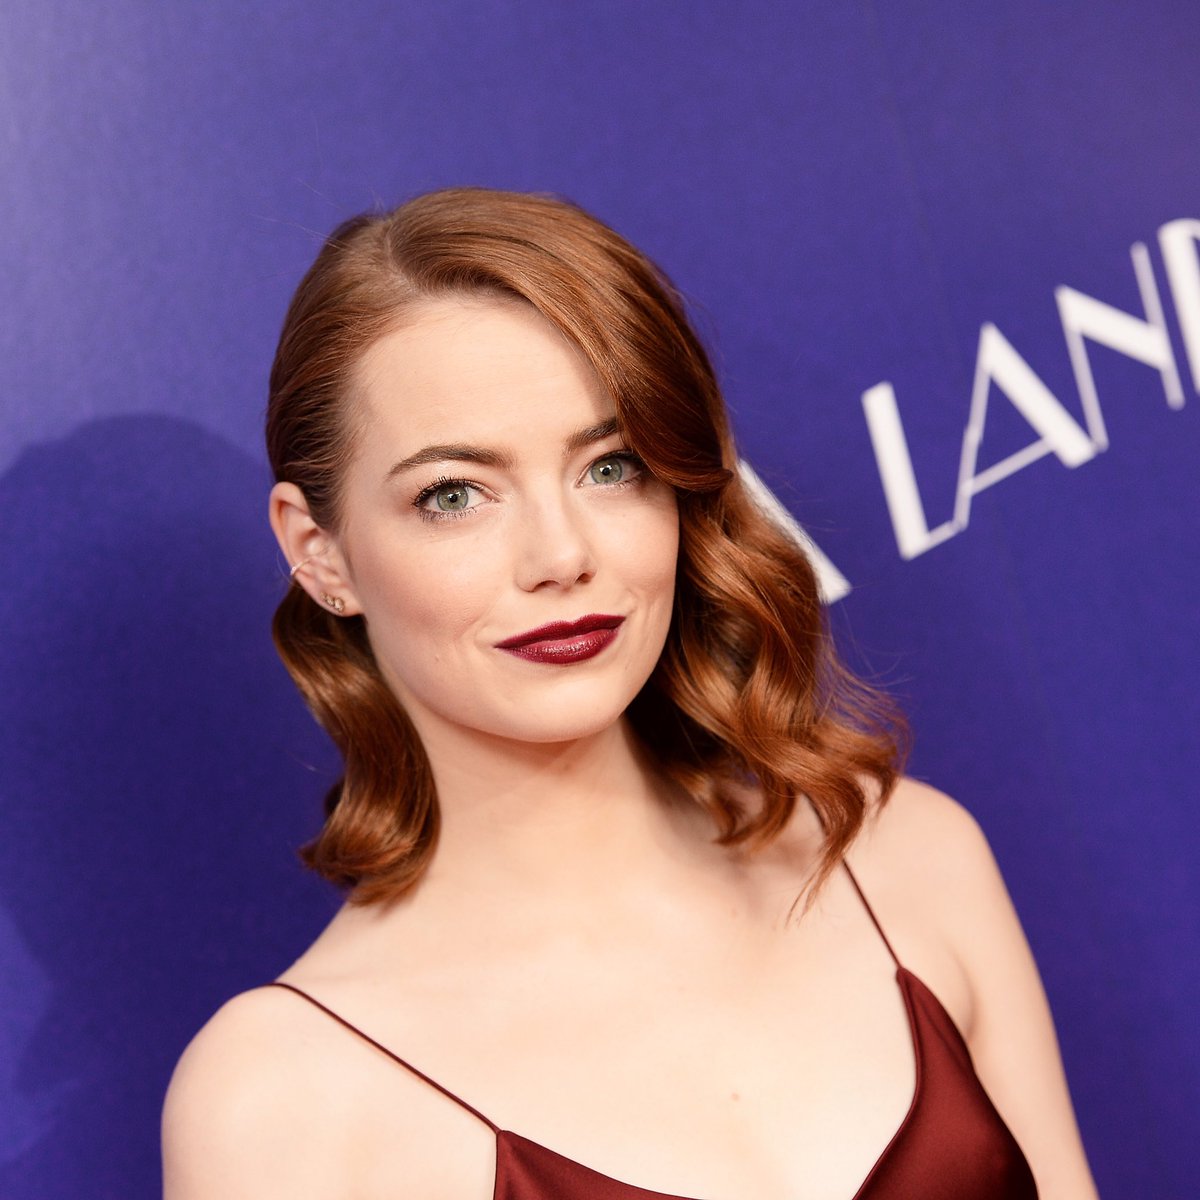 Emma Stone was offered a role in Paul Feig’s Ghostbusters but turned it down because she didn’t want to do another franchise so soon after The Amazing Spider-Man.